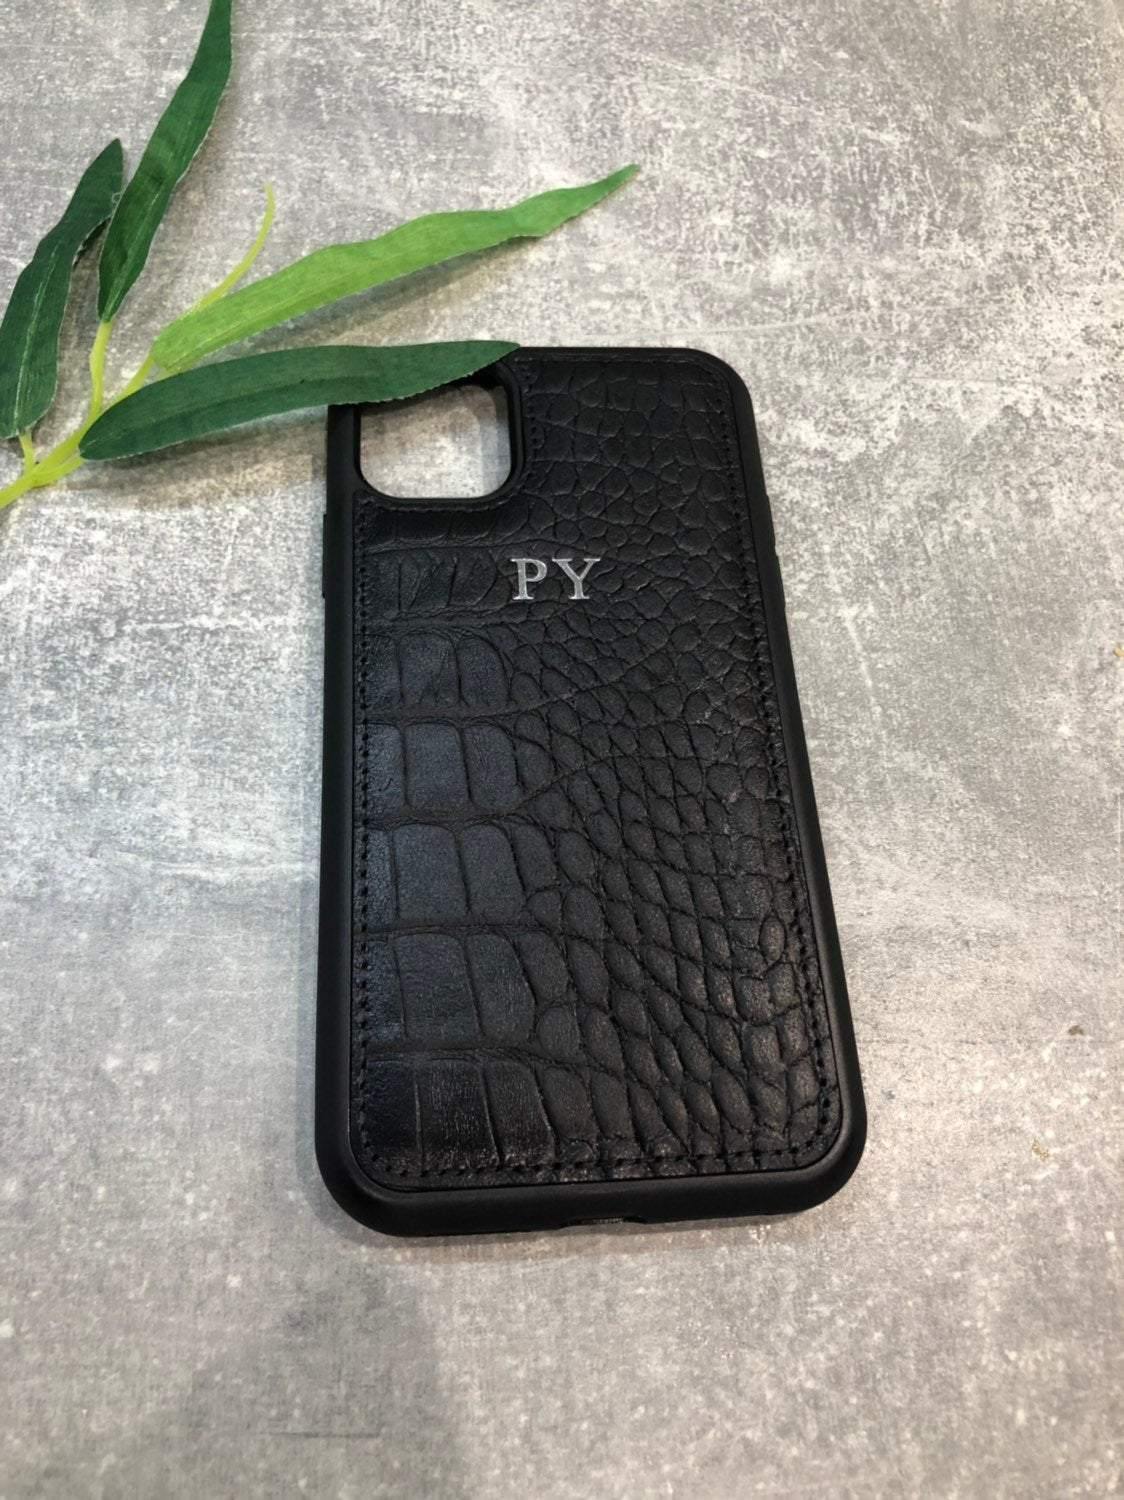 iPhone 11, 11 Pro, 11 Pro Max genuine leather phone case personalised with name or initials - PersonalisebyLisa